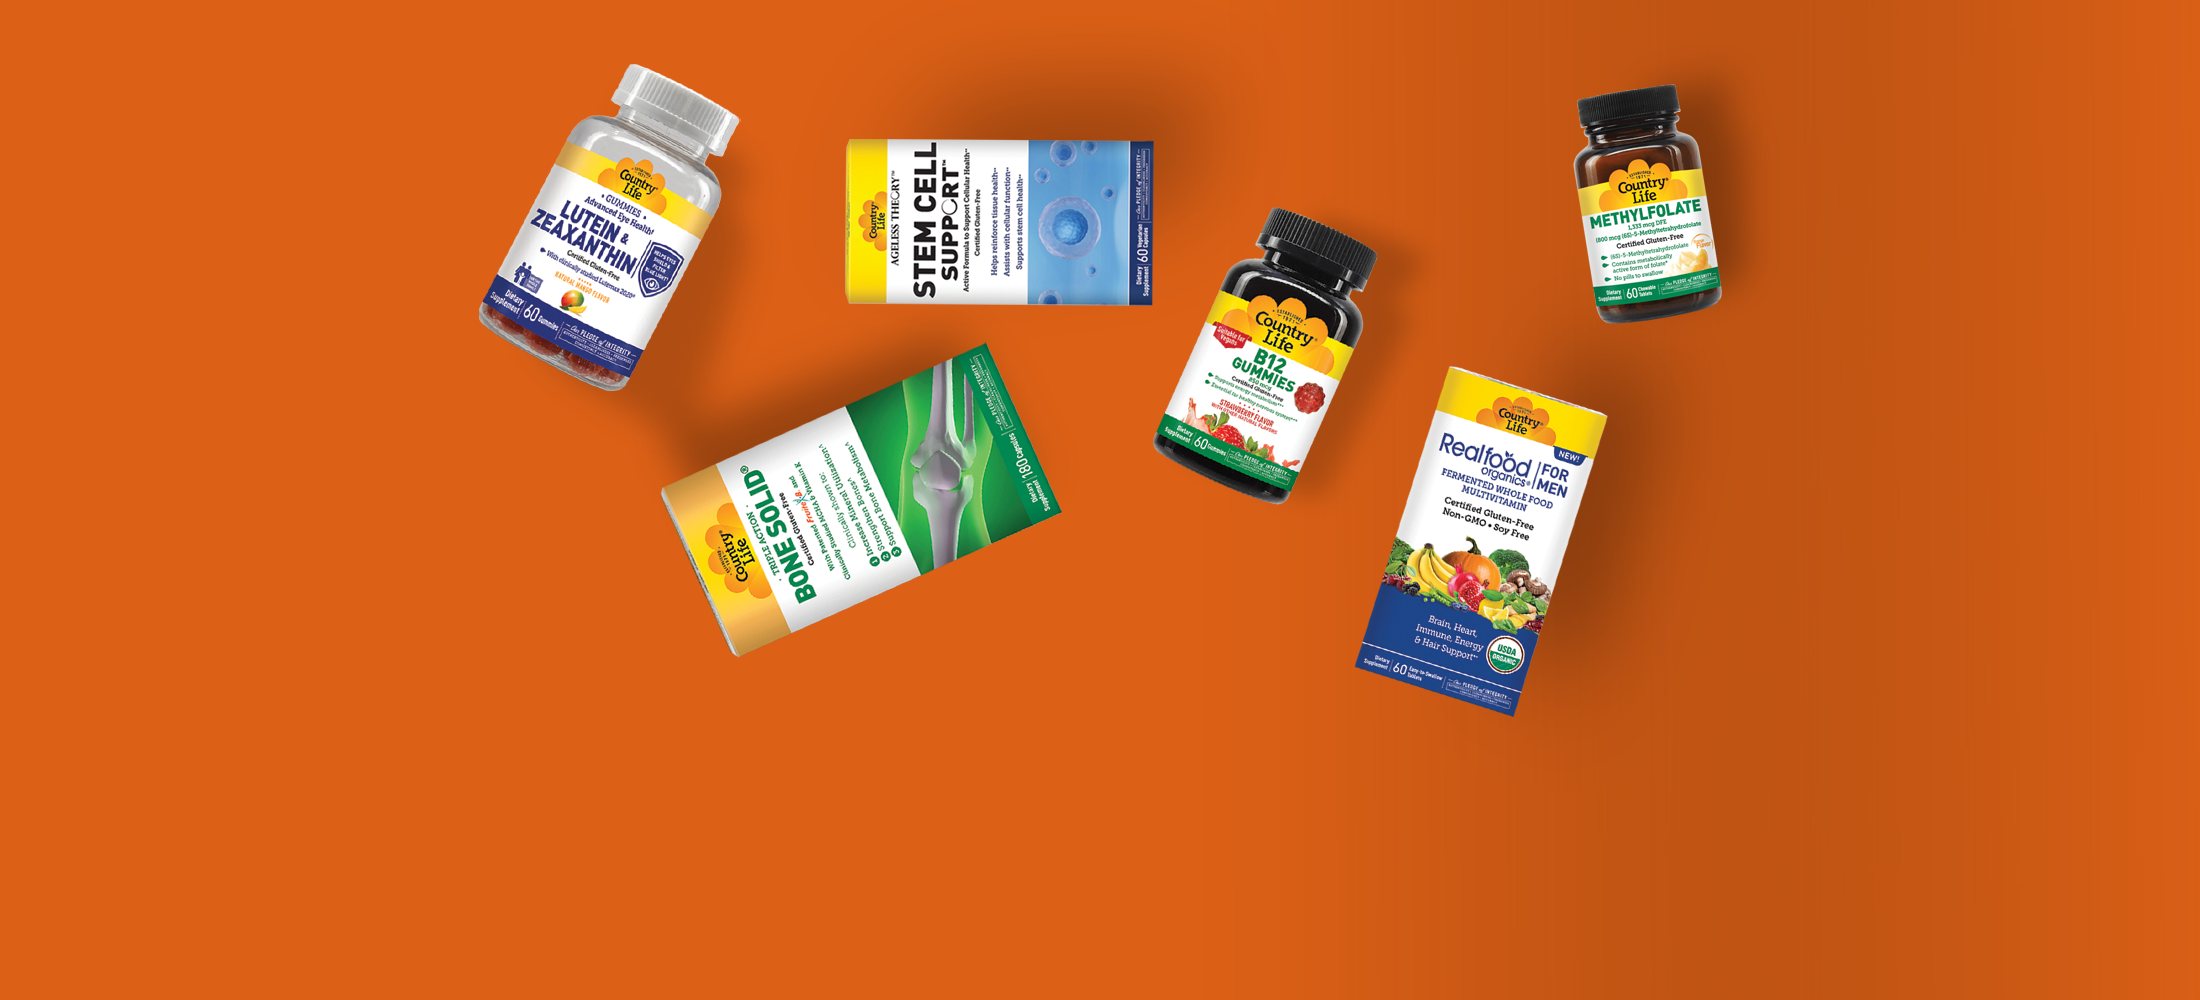 A collection of daily health supplements on an orange background